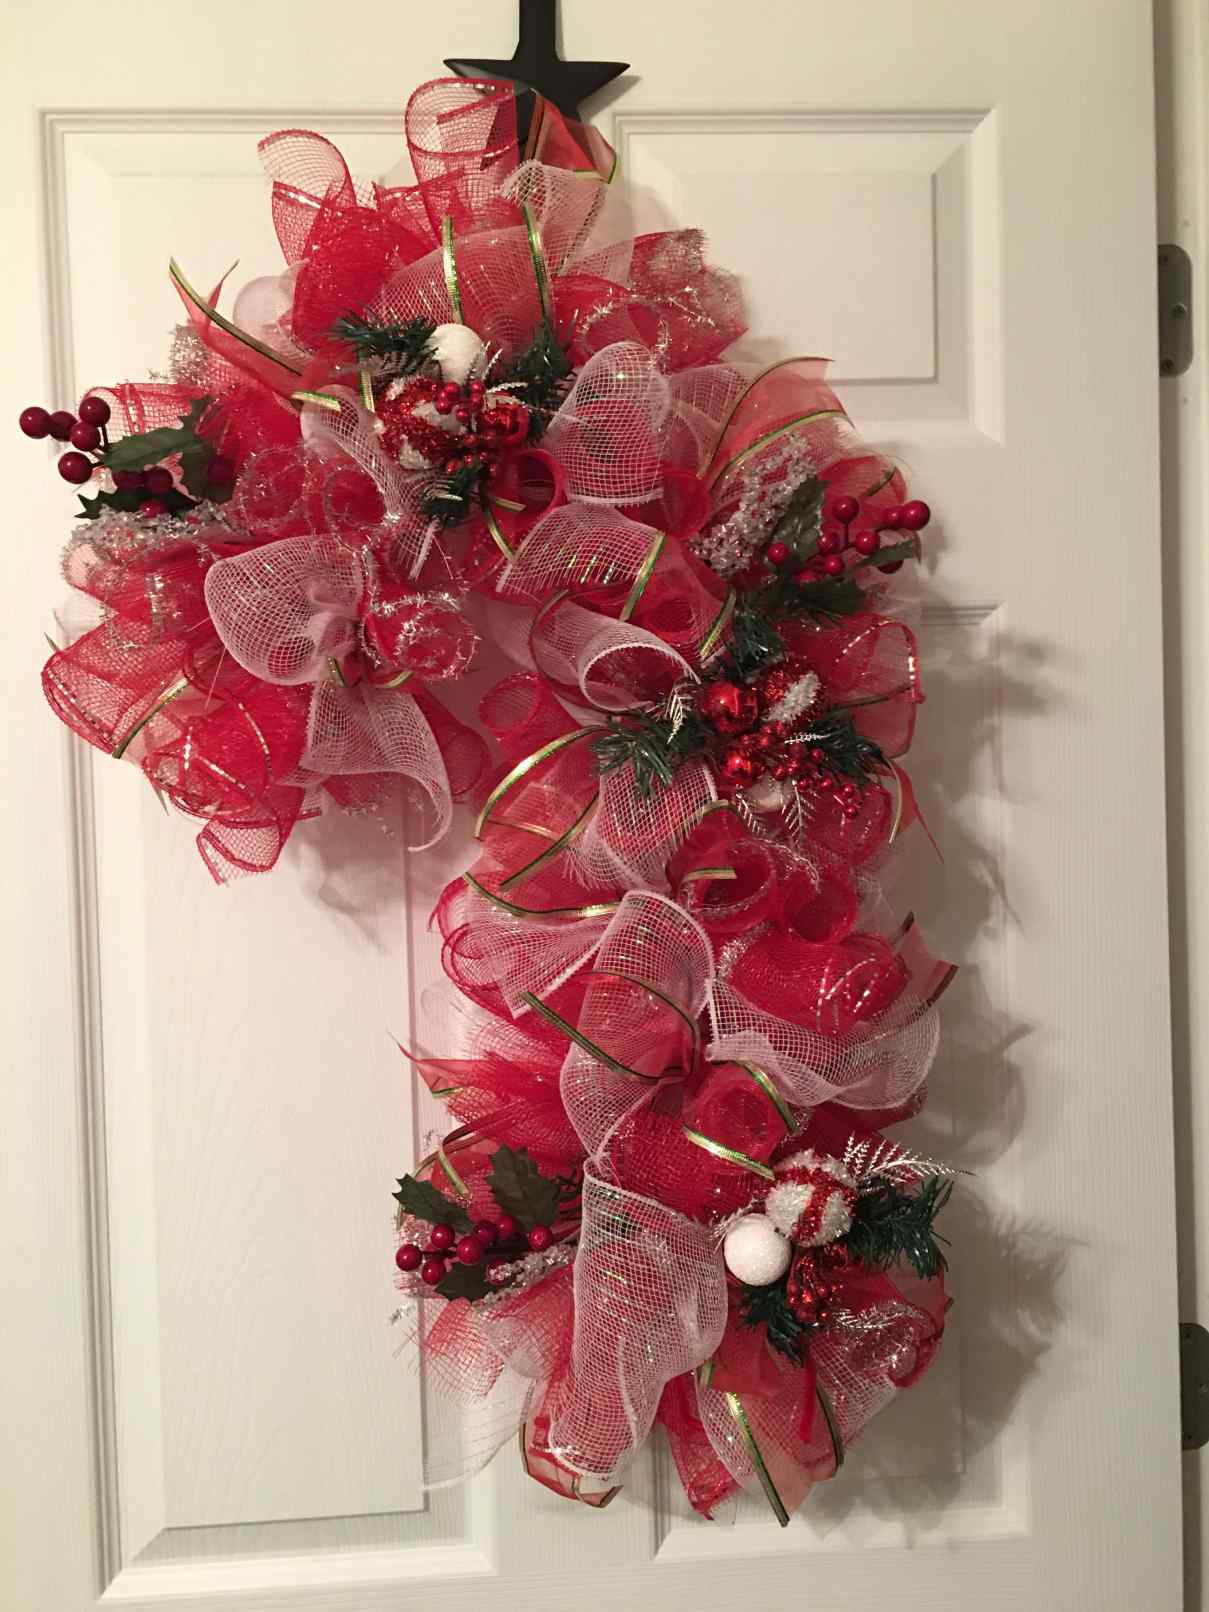 18 Elegant Vase Shaped Trees 2023 free download vase shaped trees of awesome dollar tree christmas wreath wreath pertaining to candy cane wreath using dollar tree products clp